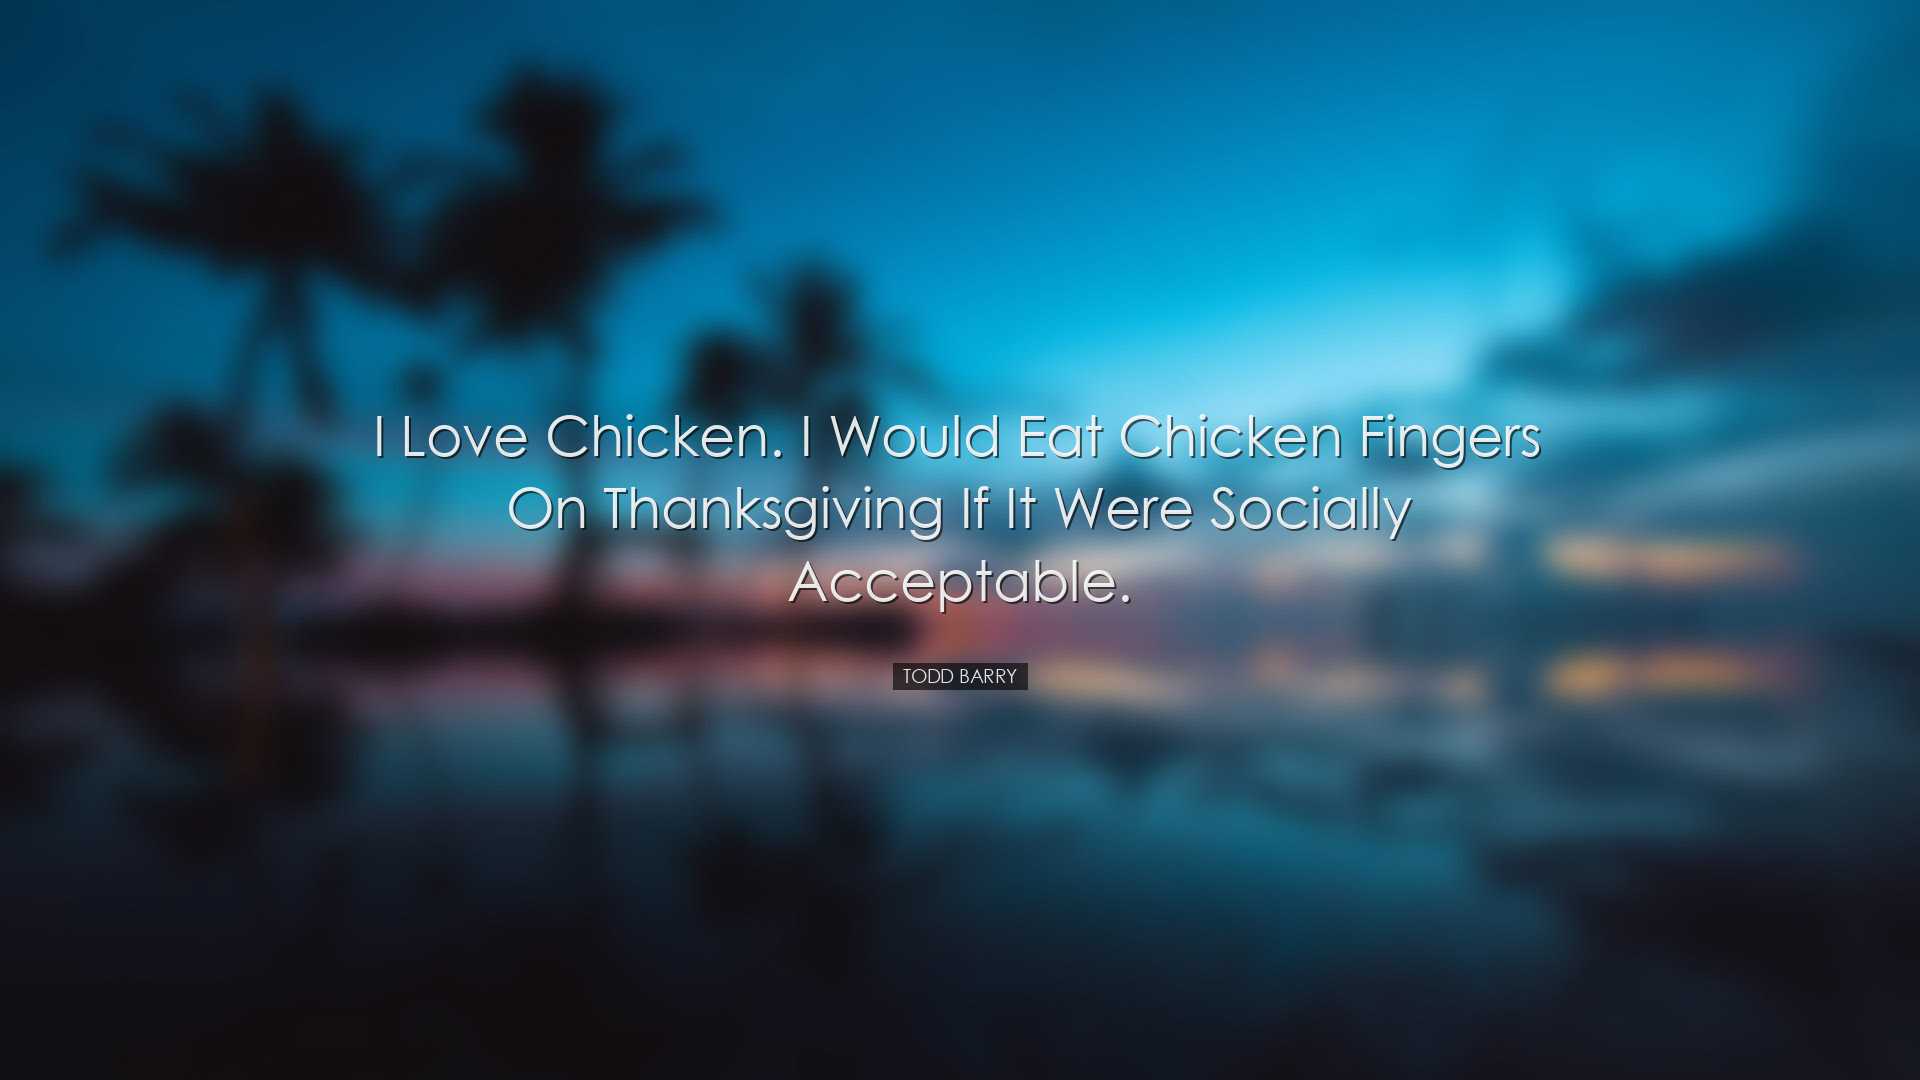 I love chicken. I would eat chicken fingers on Thanksgiving if it